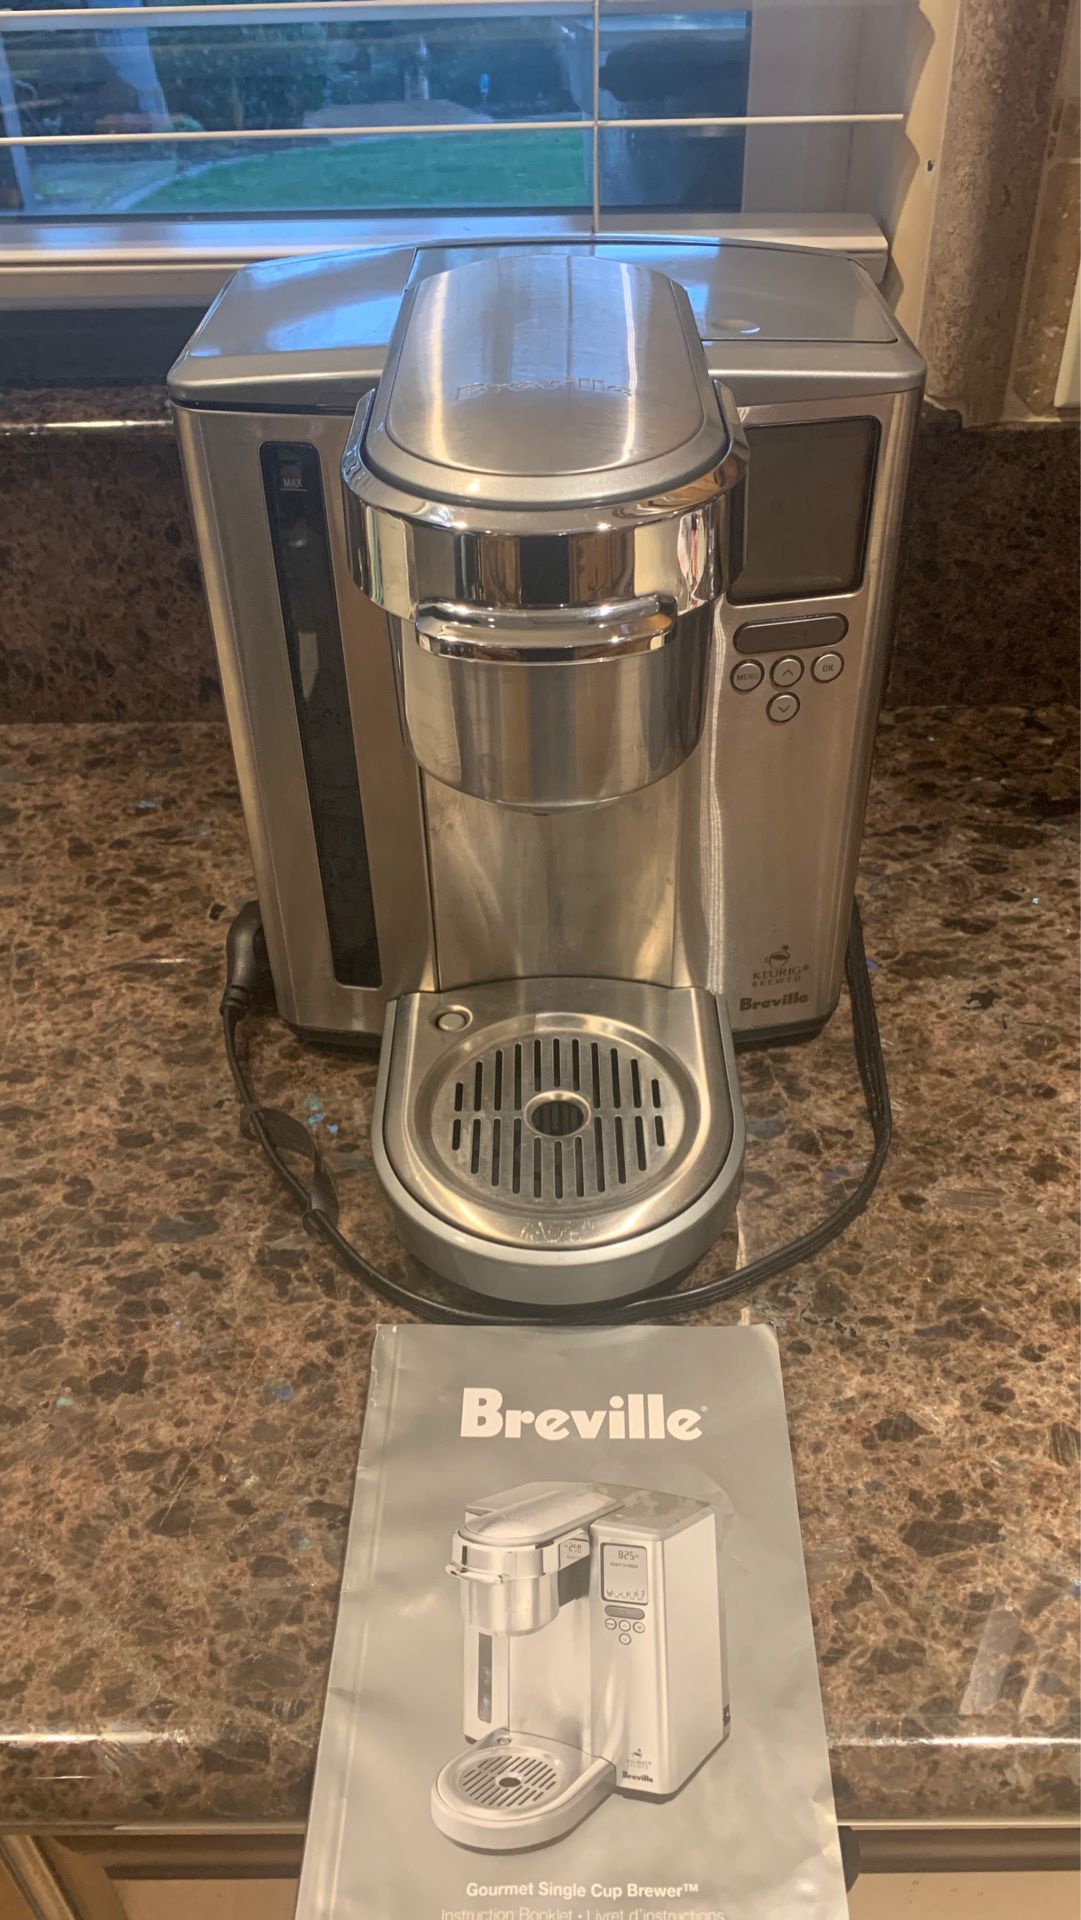 Breville Keurig Single cup Brewer Coffee Maker K-cup ( paid $299 new).